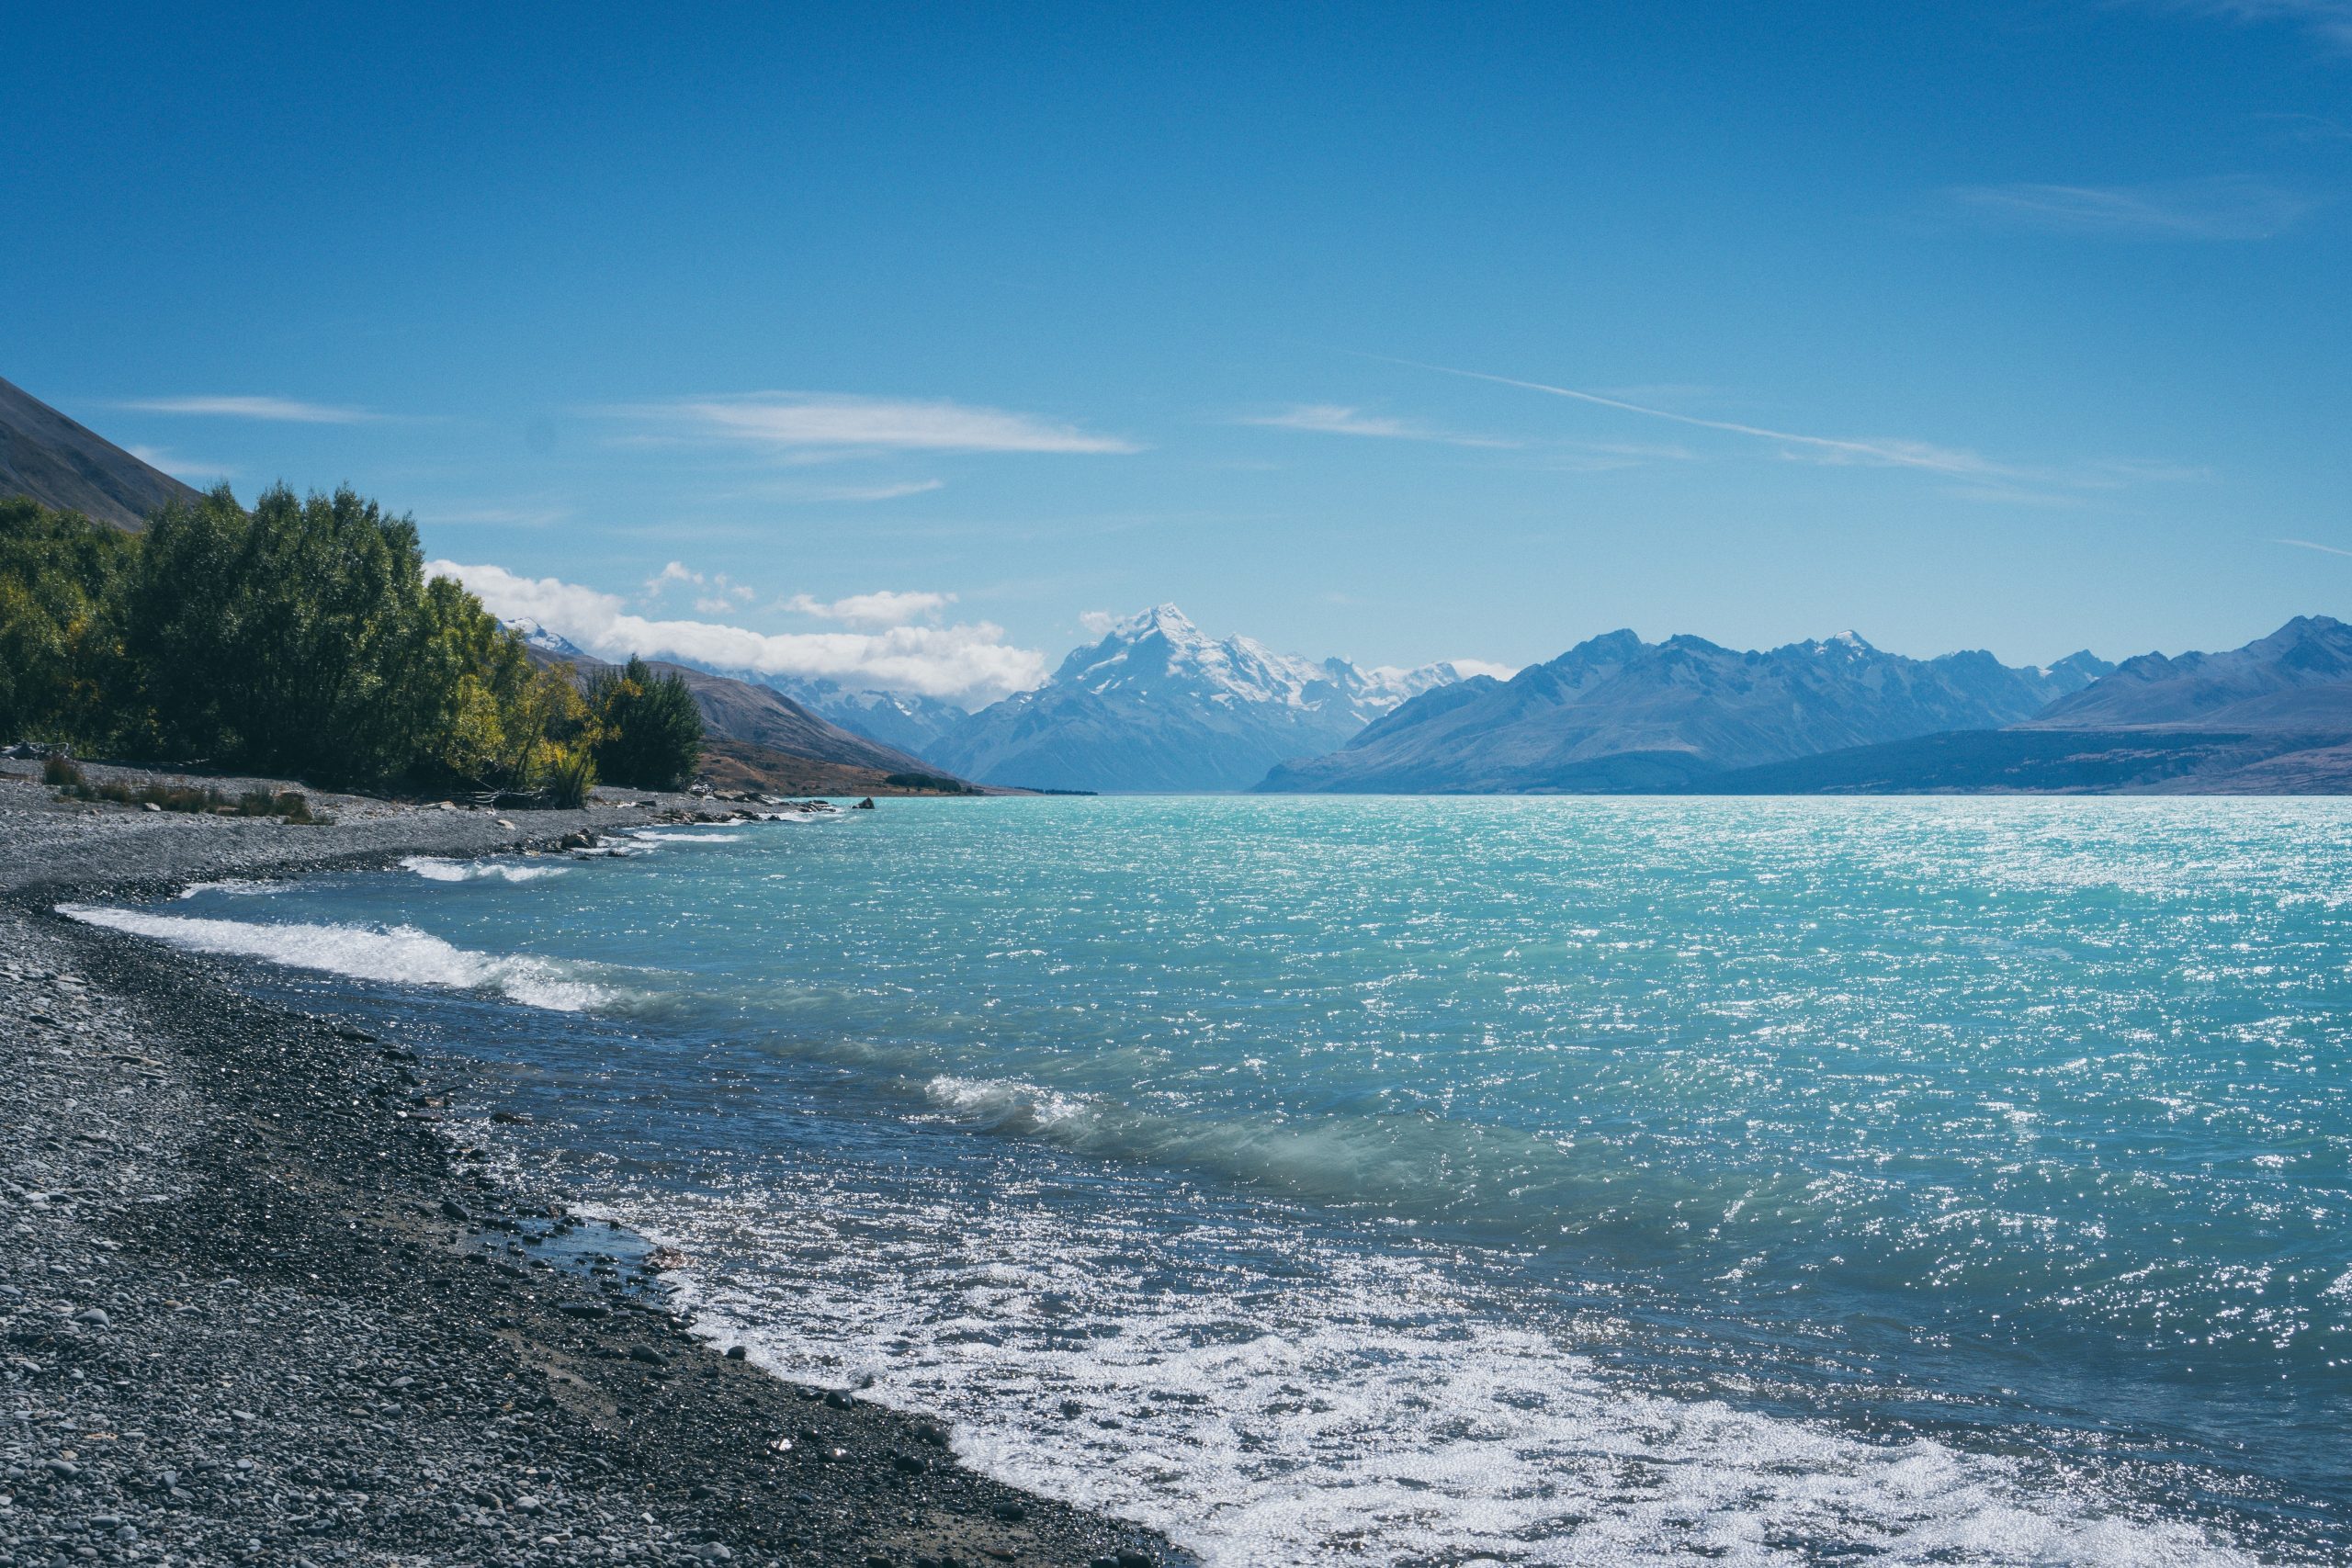 A bright turquoise lake with a black rocky shoreline flanked by snow-capped mountains in the distance.